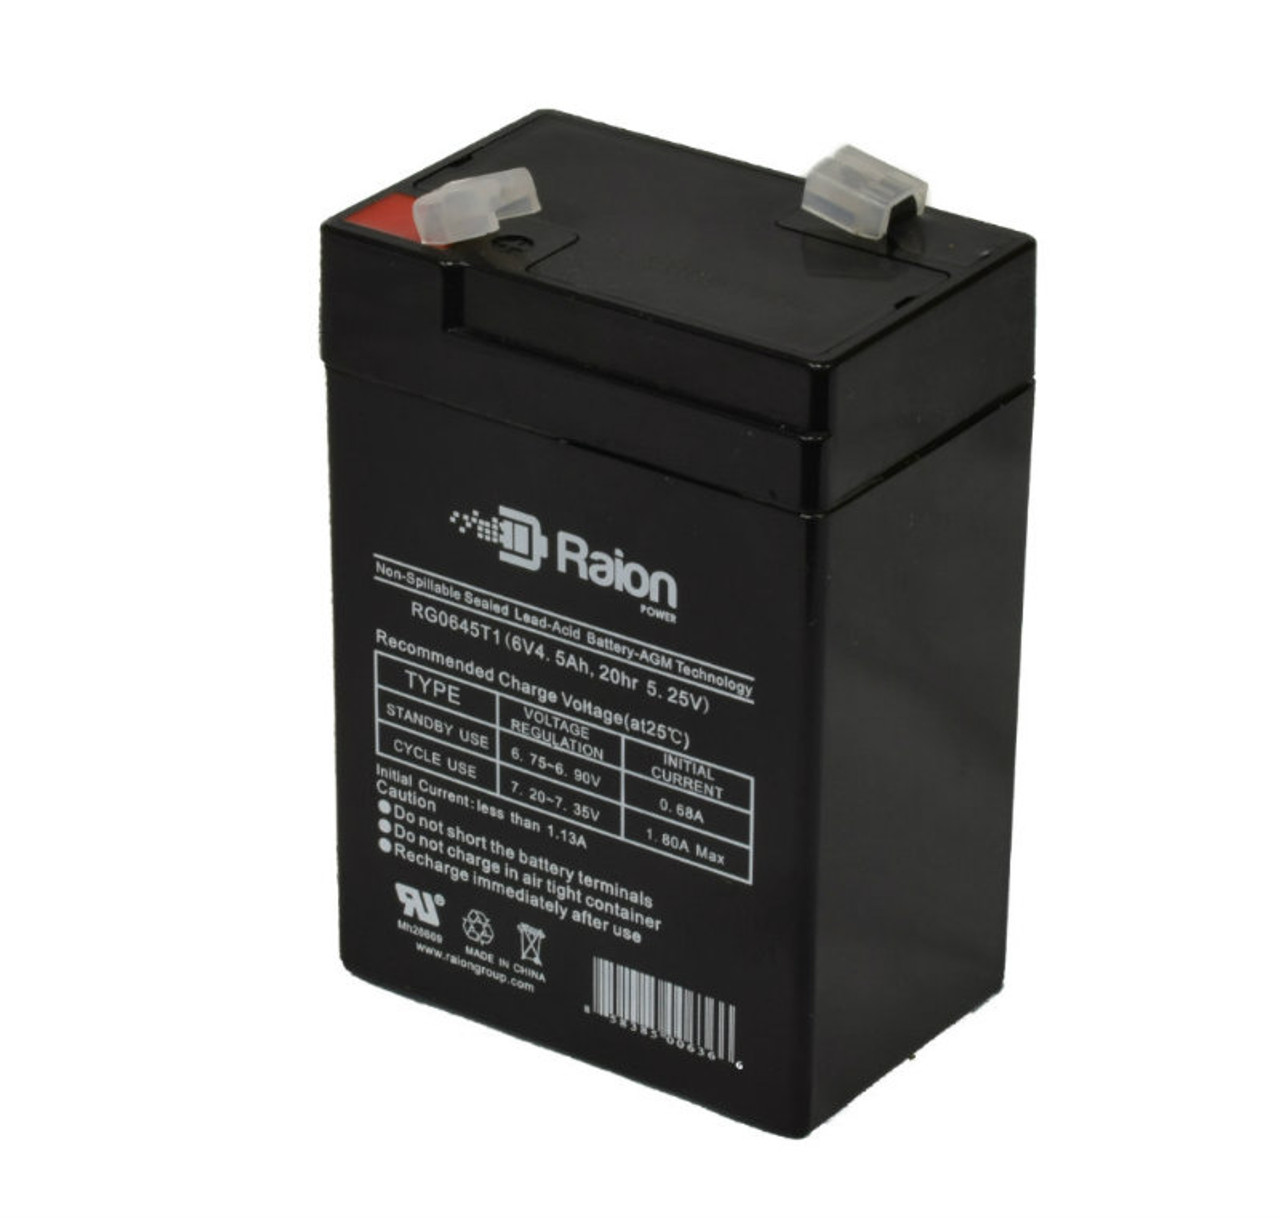 Raion Power RG0645T1 6V 4.5Ah Replacement Battery Cartridge for Vision CP650